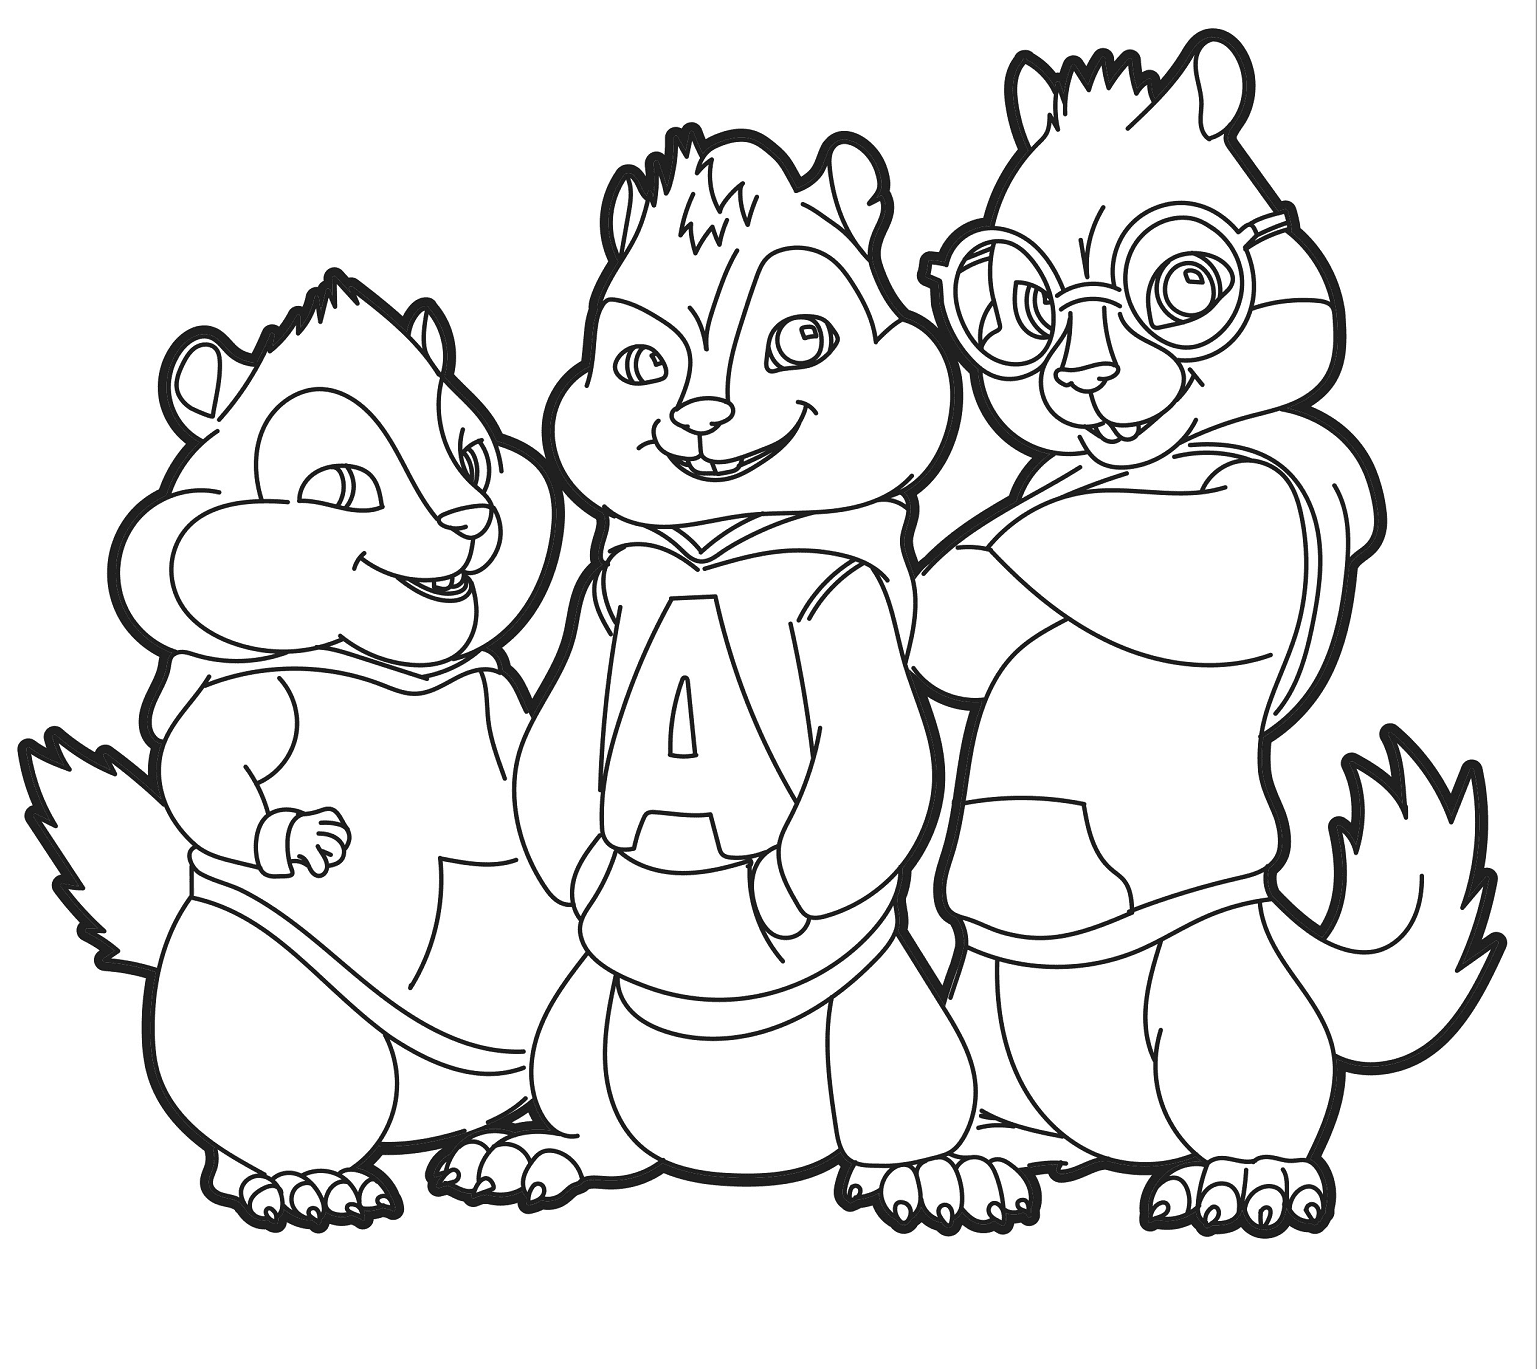 The Chipmunks Coloring Page